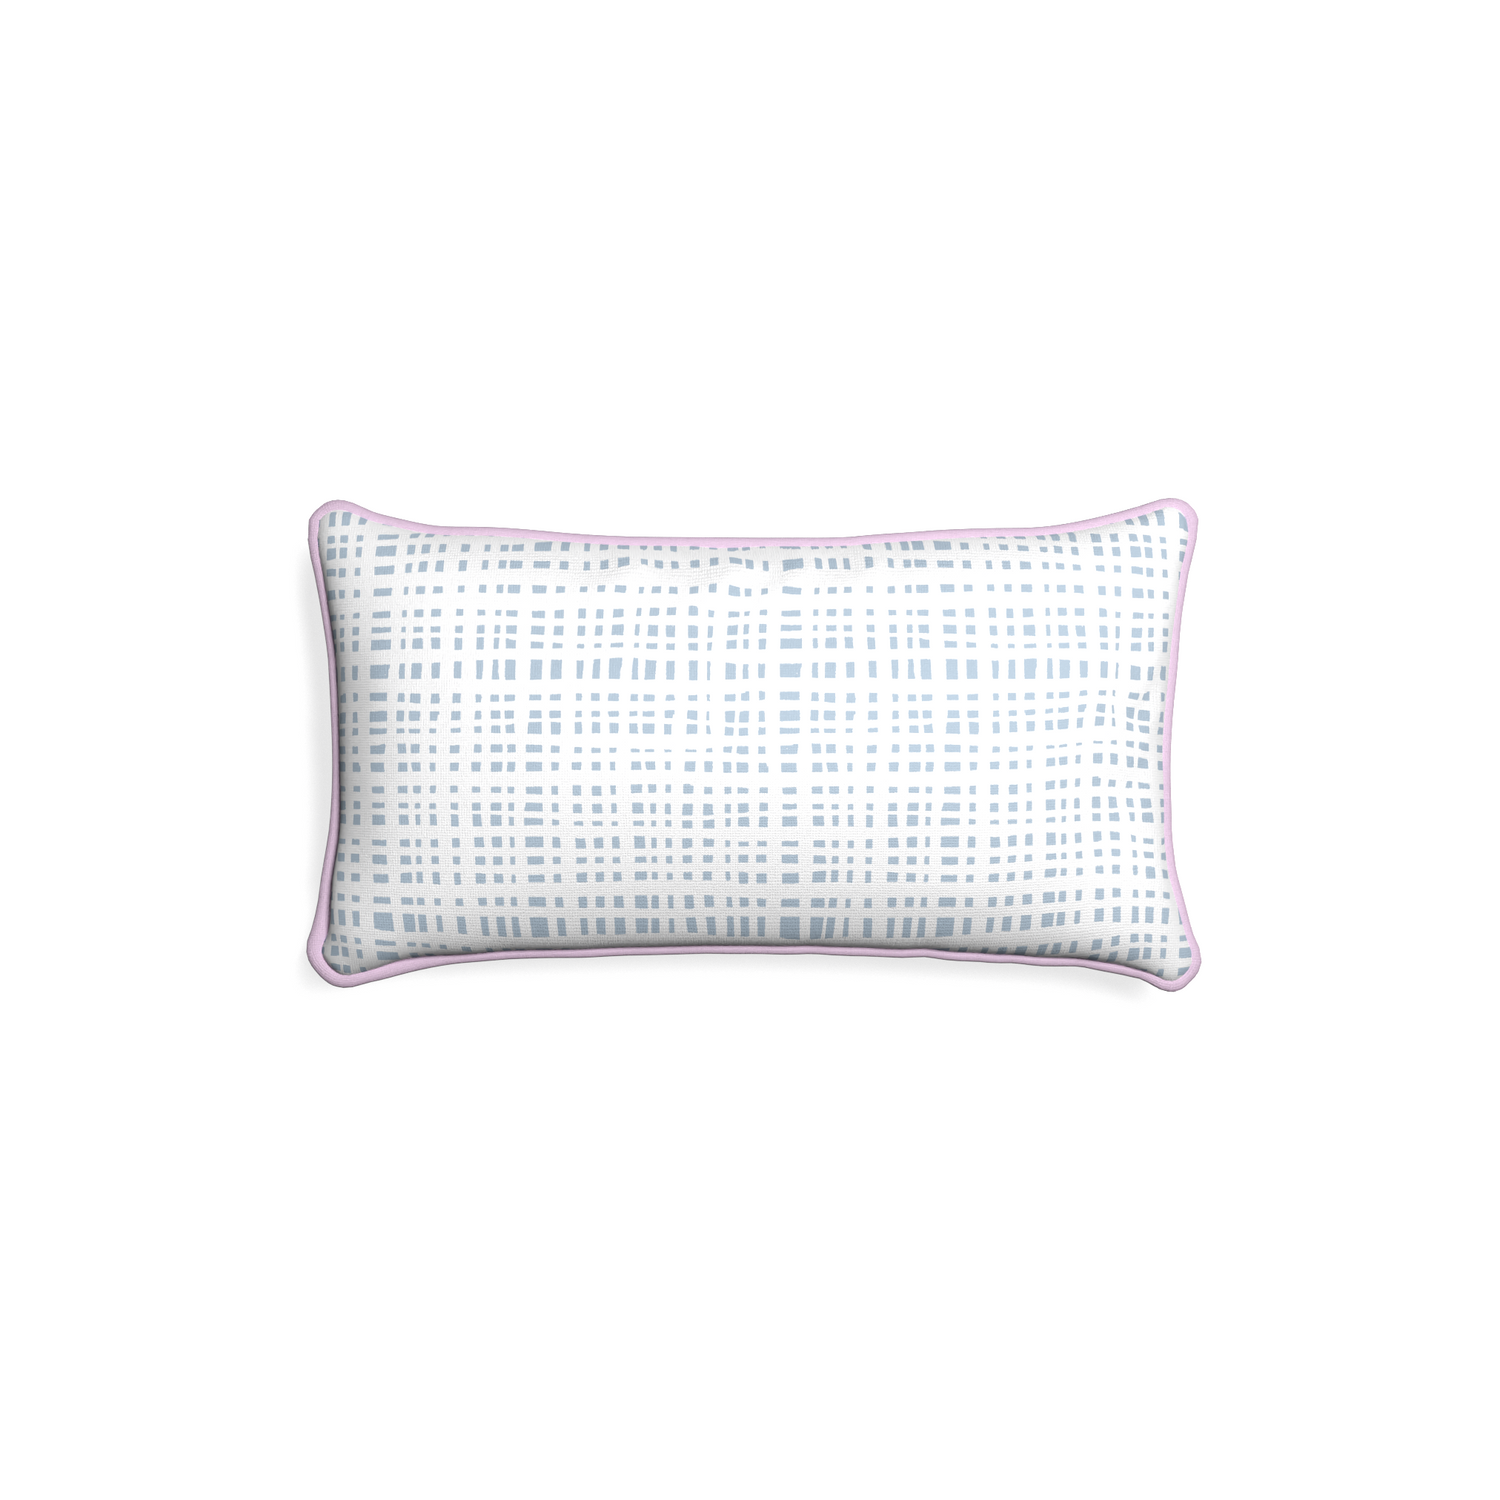 Petite-lumbar ginger custom plaid sky bluepillow with l piping on white background